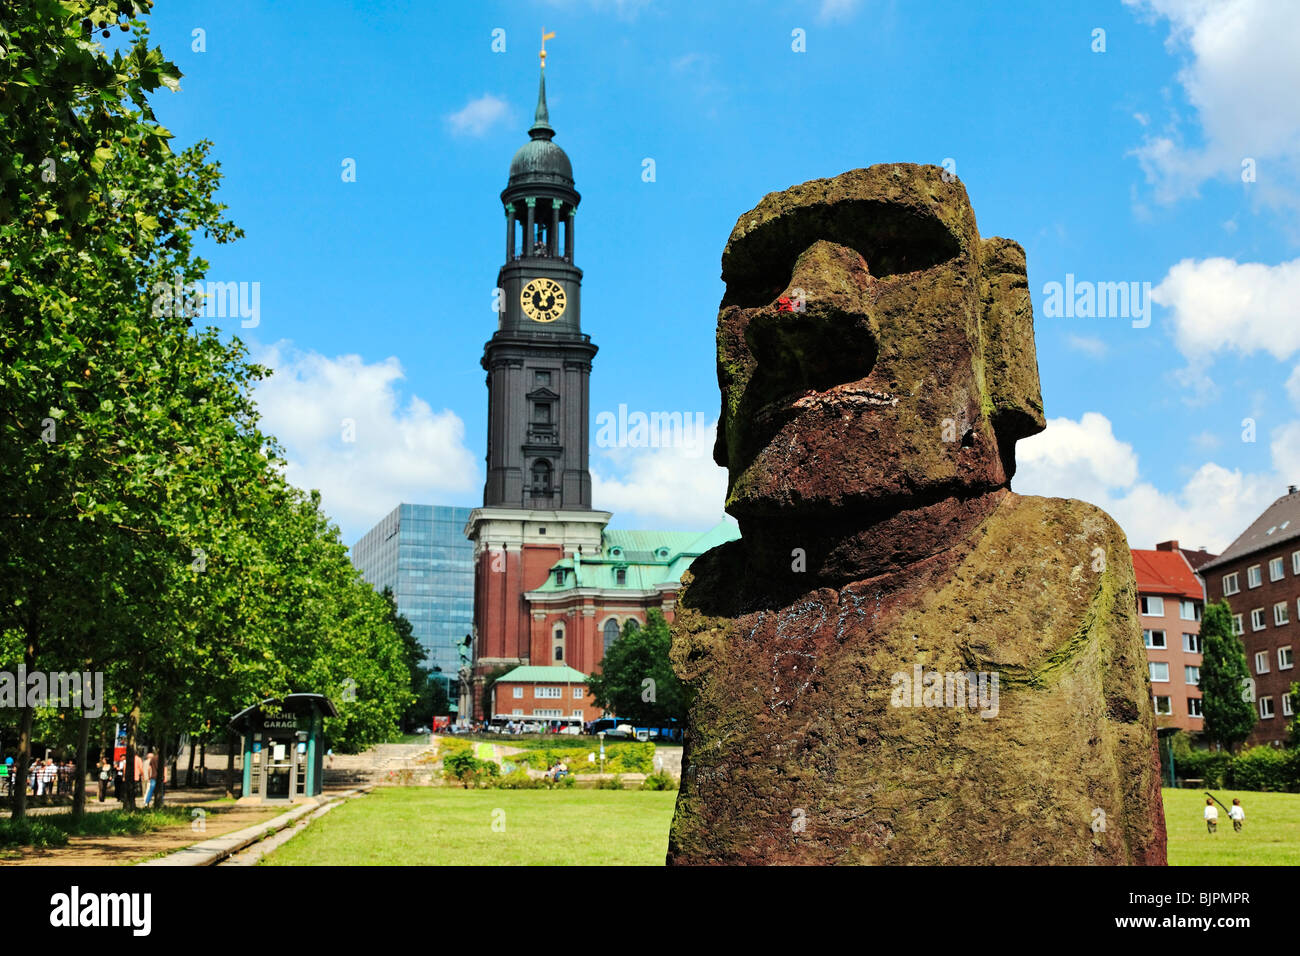 Angelito - replication of Moai Statue from Easter Island at Schaarmarkt, Hamburg, Germany Stock Photo